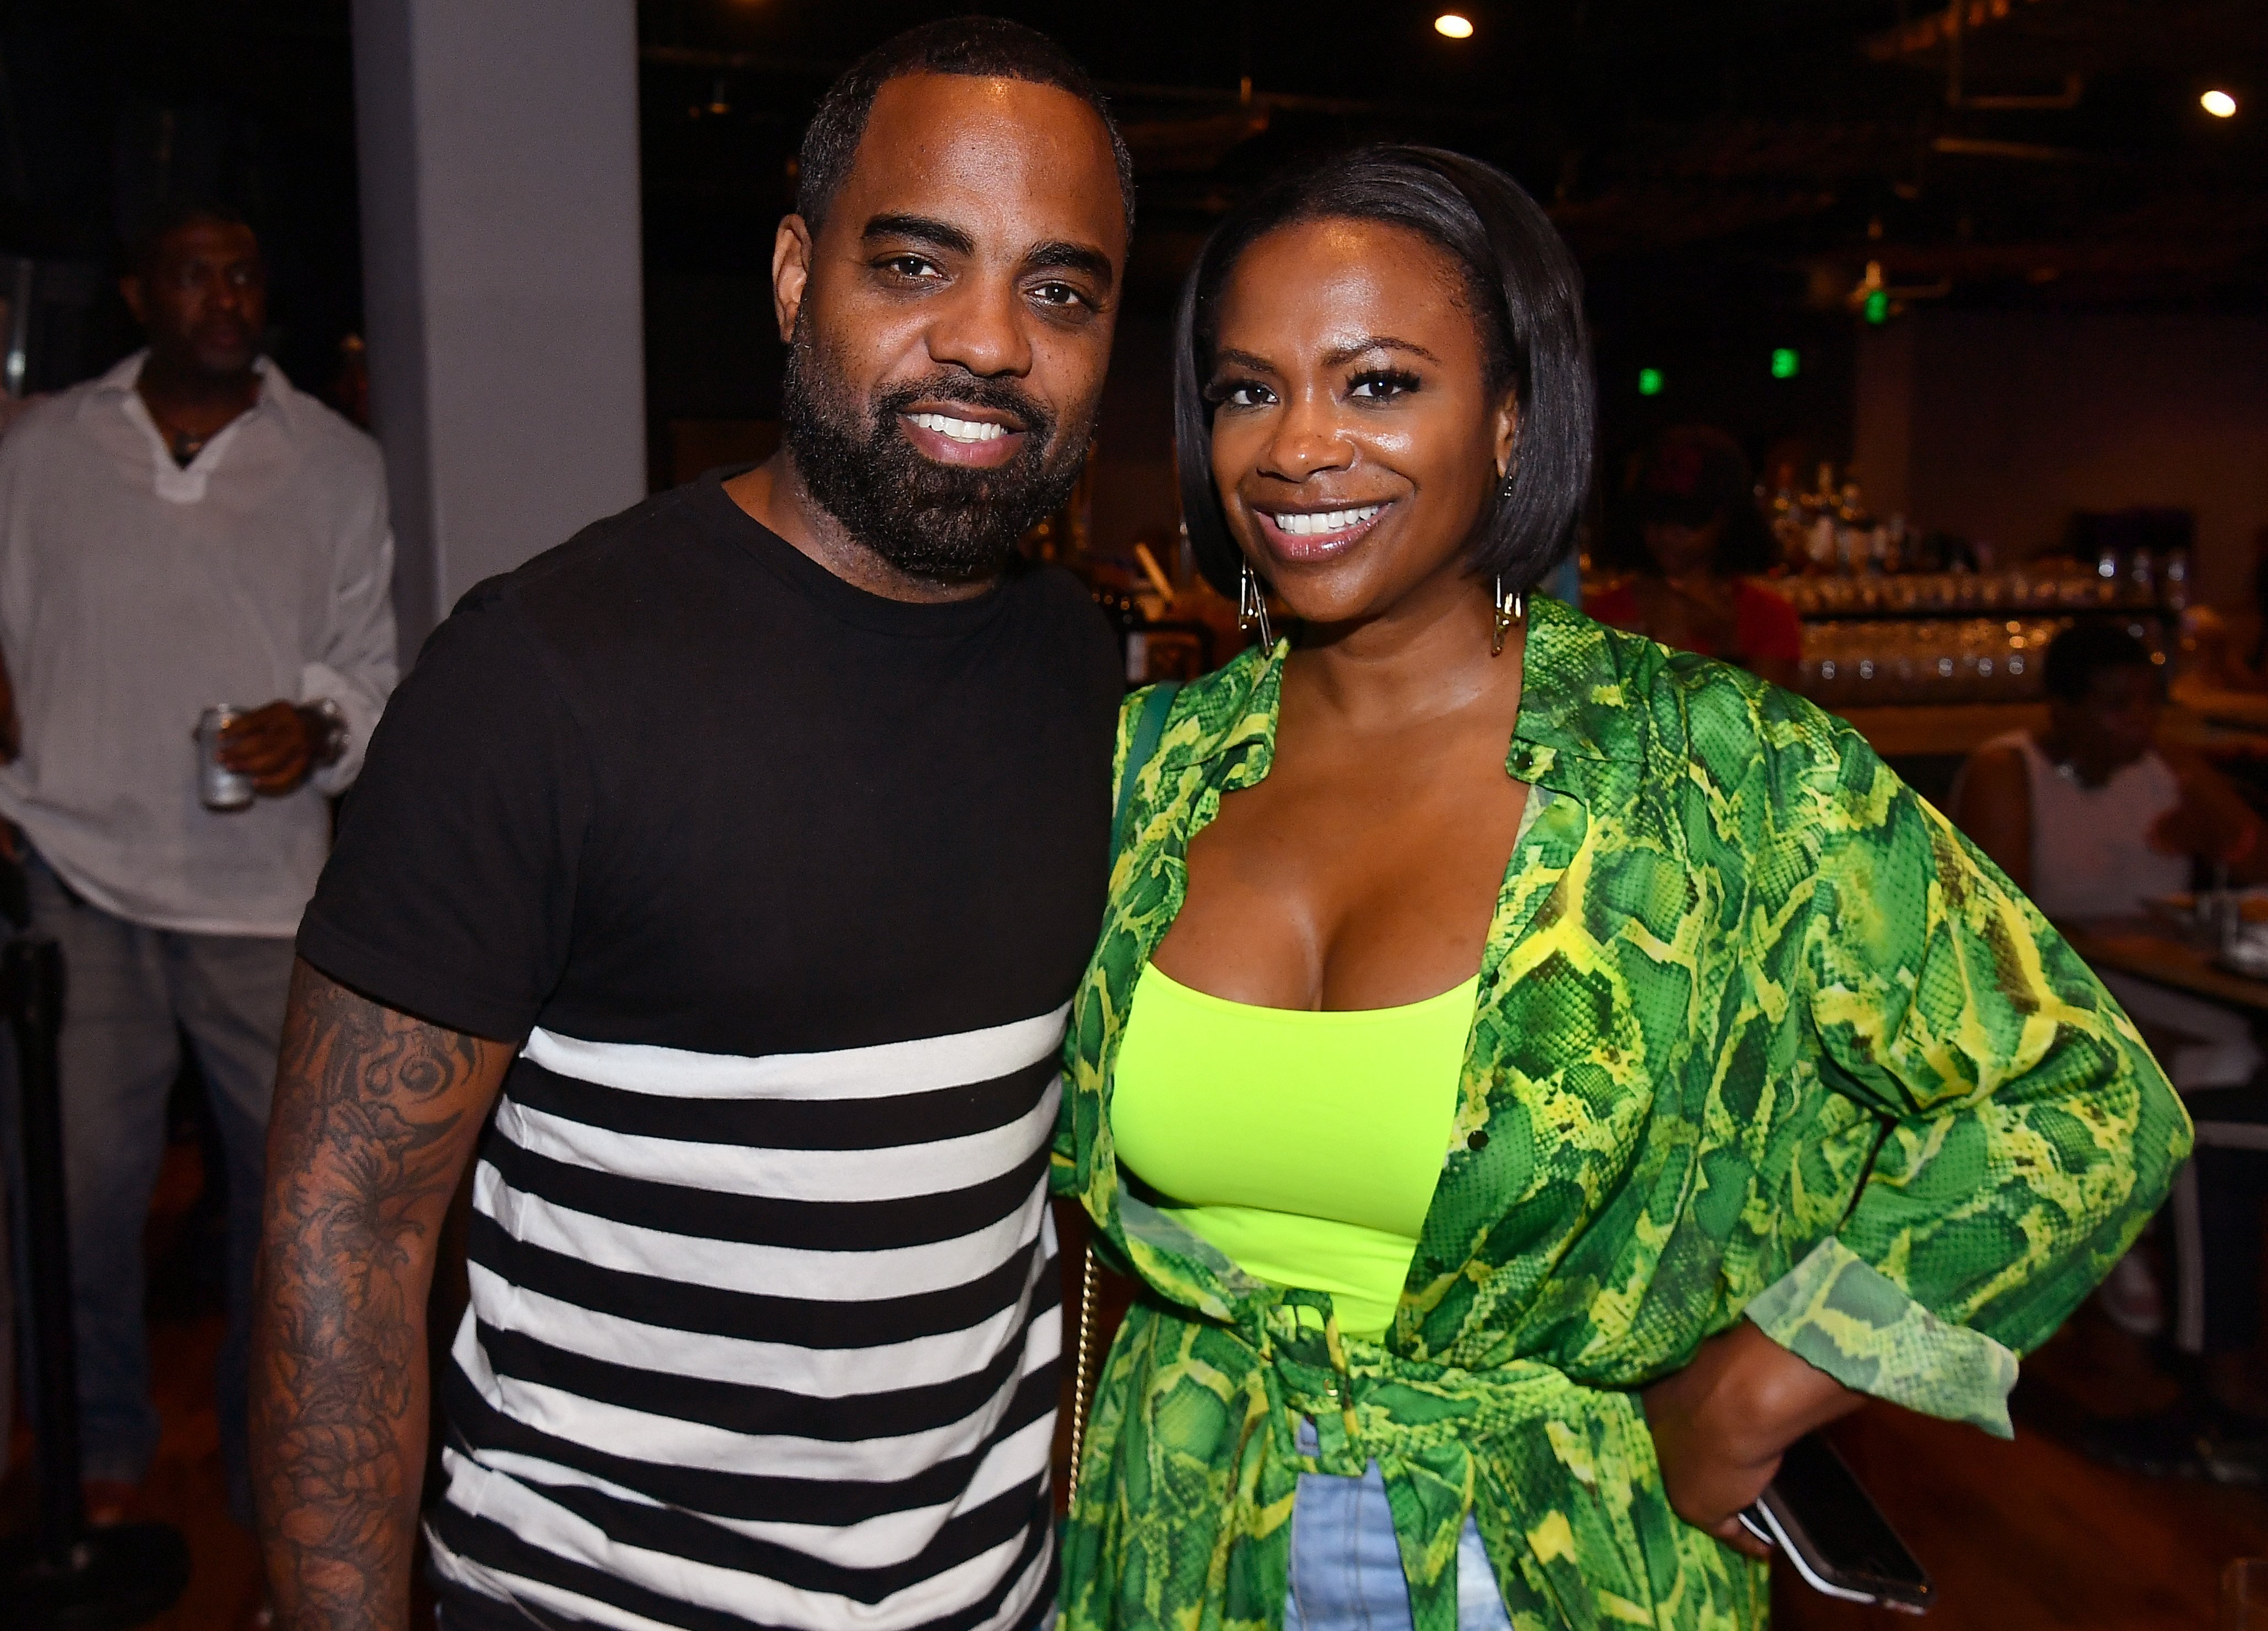 Todd Tucker and Kandi Burruss at Majic 107.5 After Dark at City Winery, 2019 | Photo: Getty Images